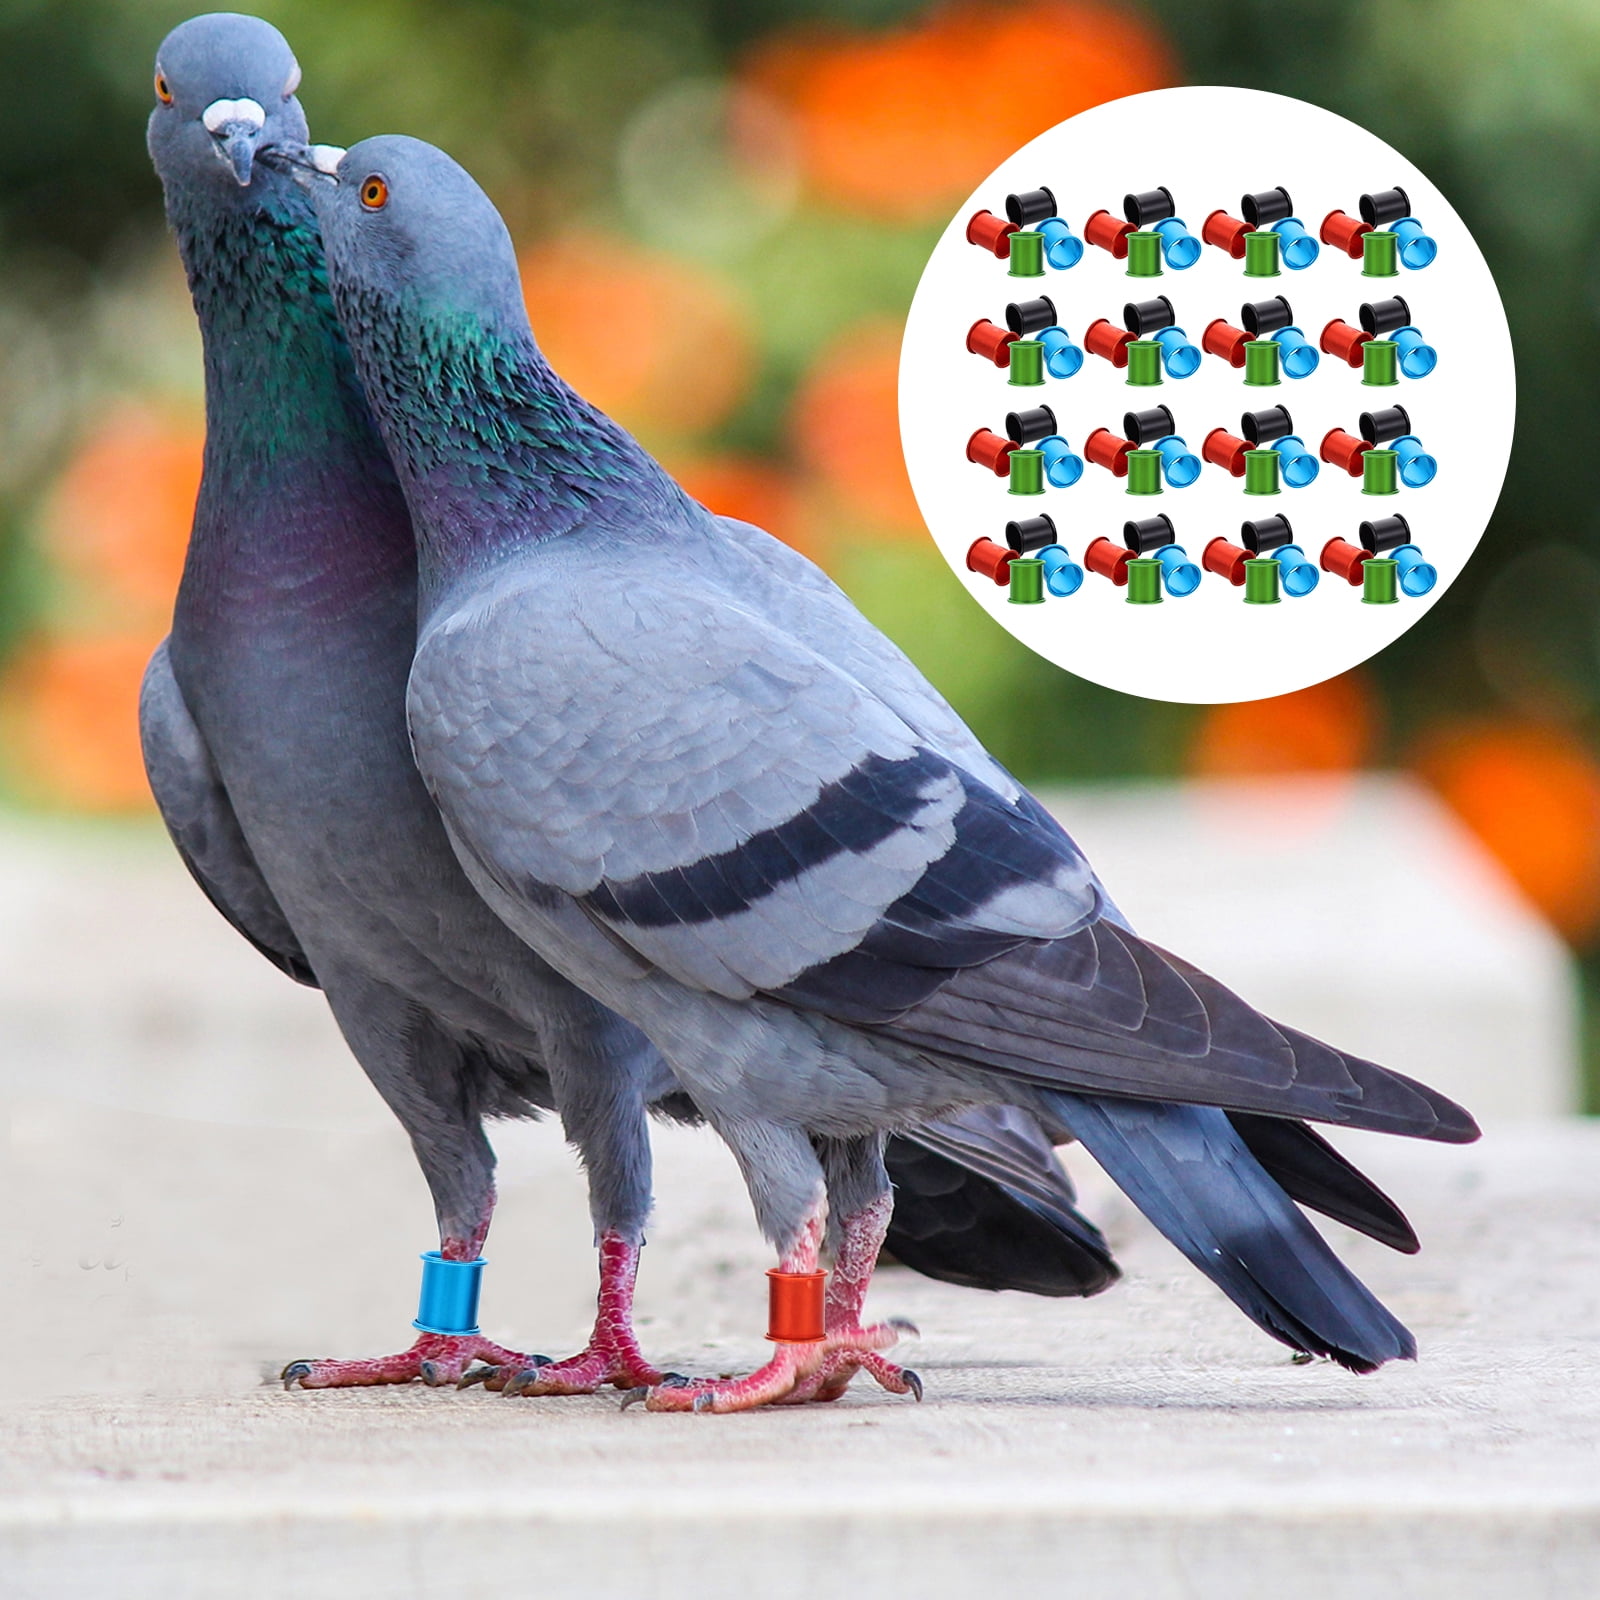 Funny Pigeon Gifts Pigeon Racing Gifts Let's Get This Bread